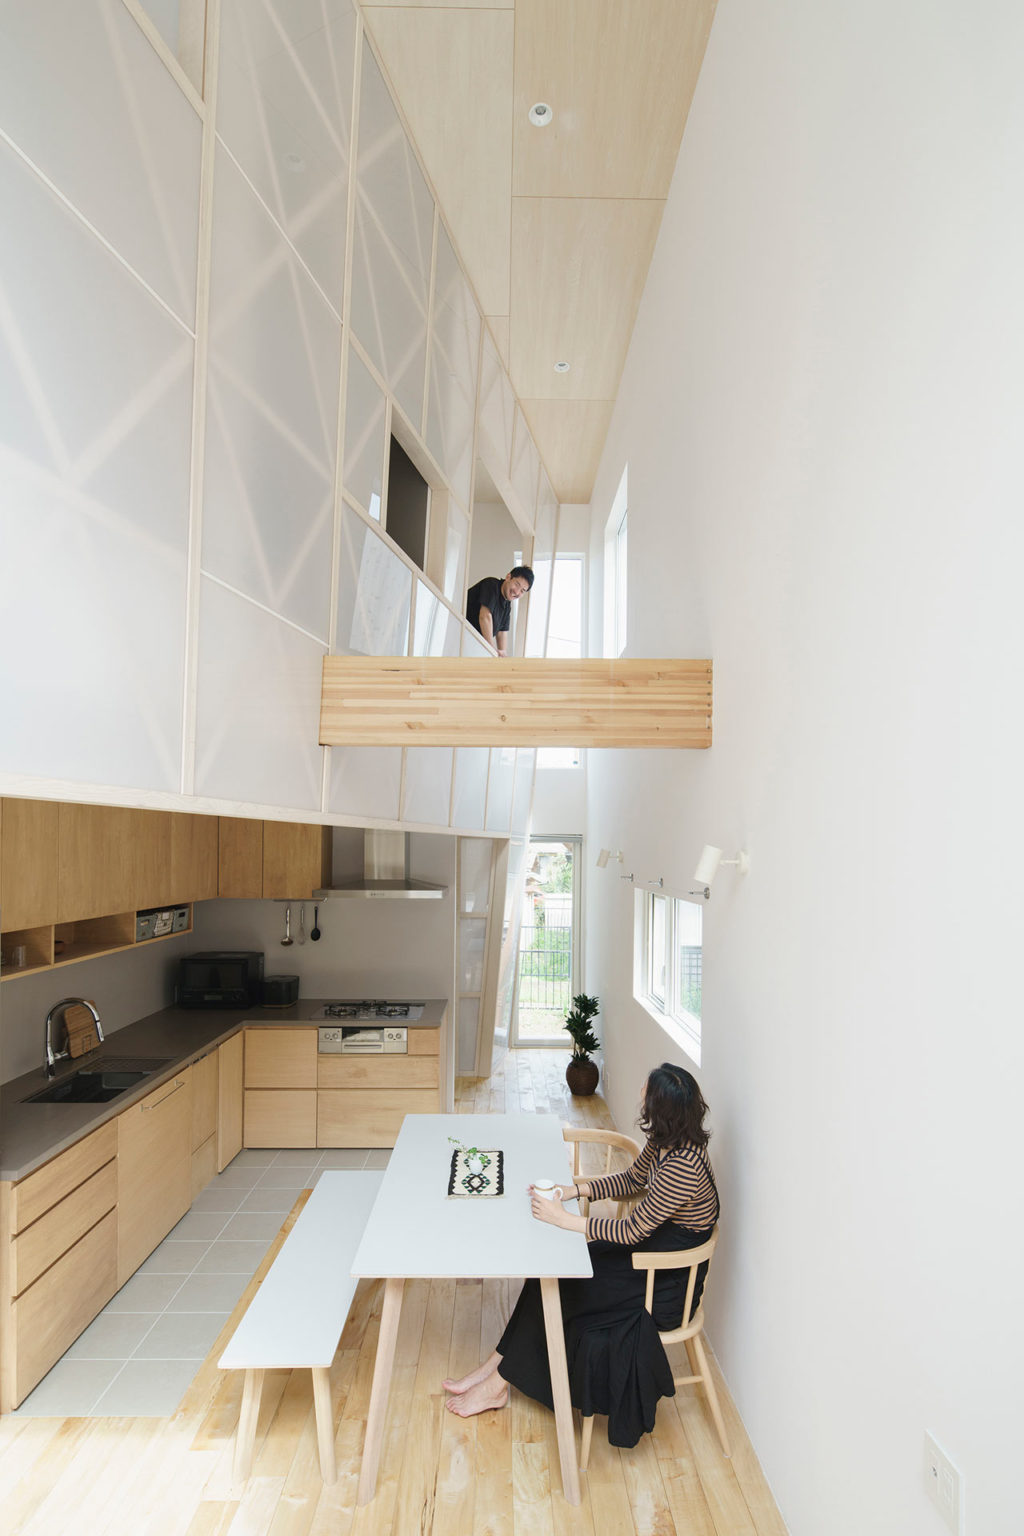 This ultra minimalist house in Japan is done with Japanese creativity in design and decor